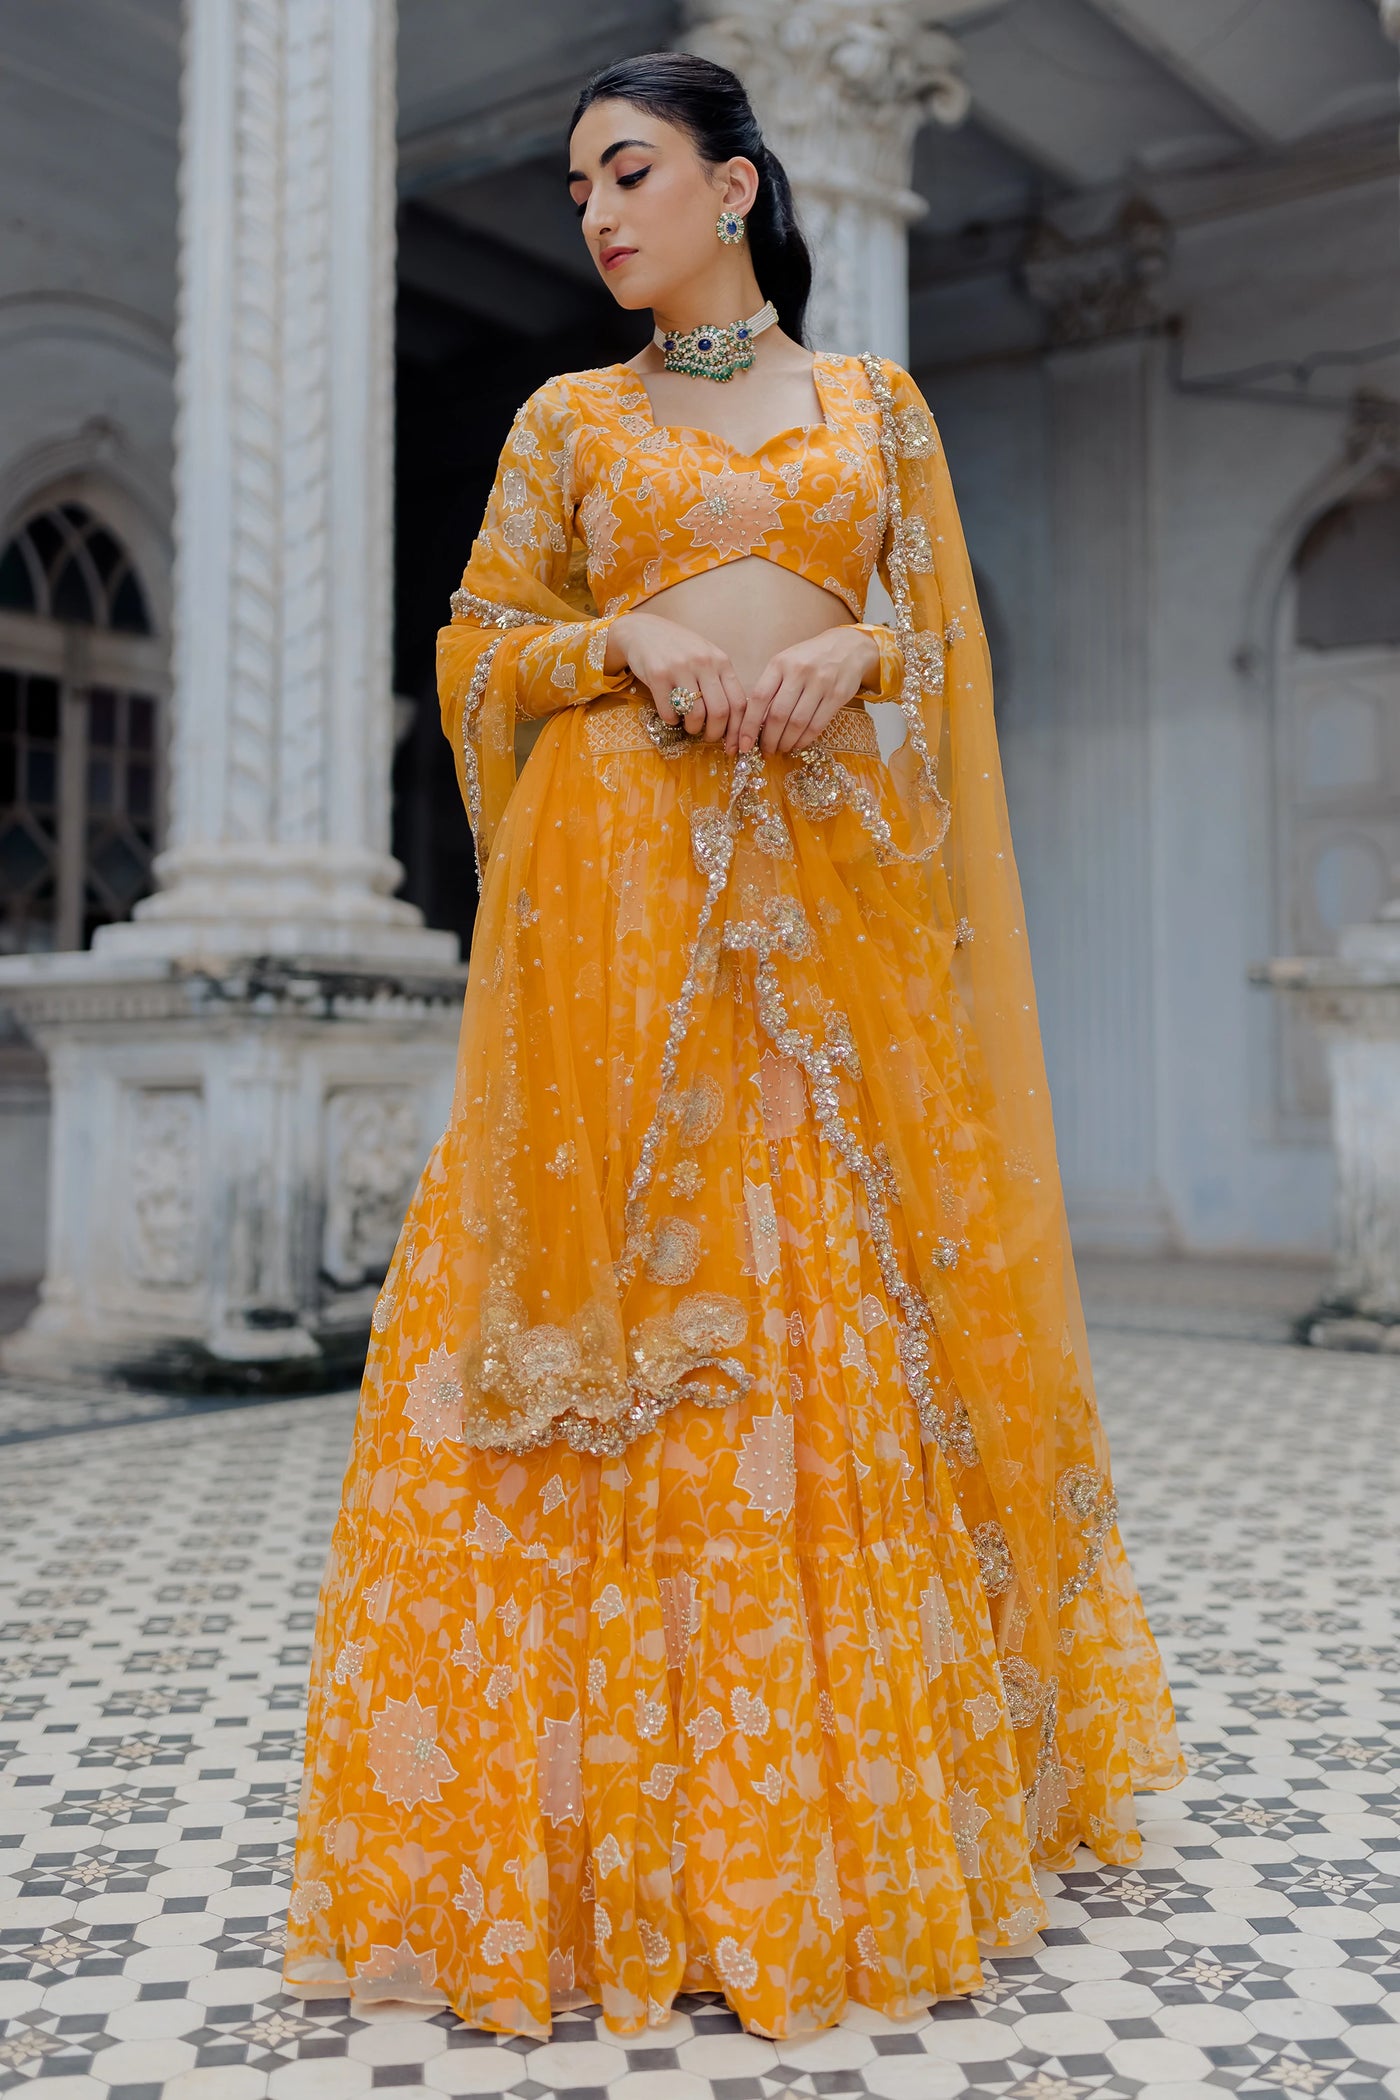 Orange Kesari Floral Lehenga Indian Clothing in Denver, CO, Aurora, CO, Boulder, CO, Fort Collins, CO, Colorado Springs, CO, Parker, CO, Highlands Ranch, CO, Cherry Creek, CO, Centennial, CO, and Longmont, CO. NATIONWIDE SHIPPING USA- India Fashion X